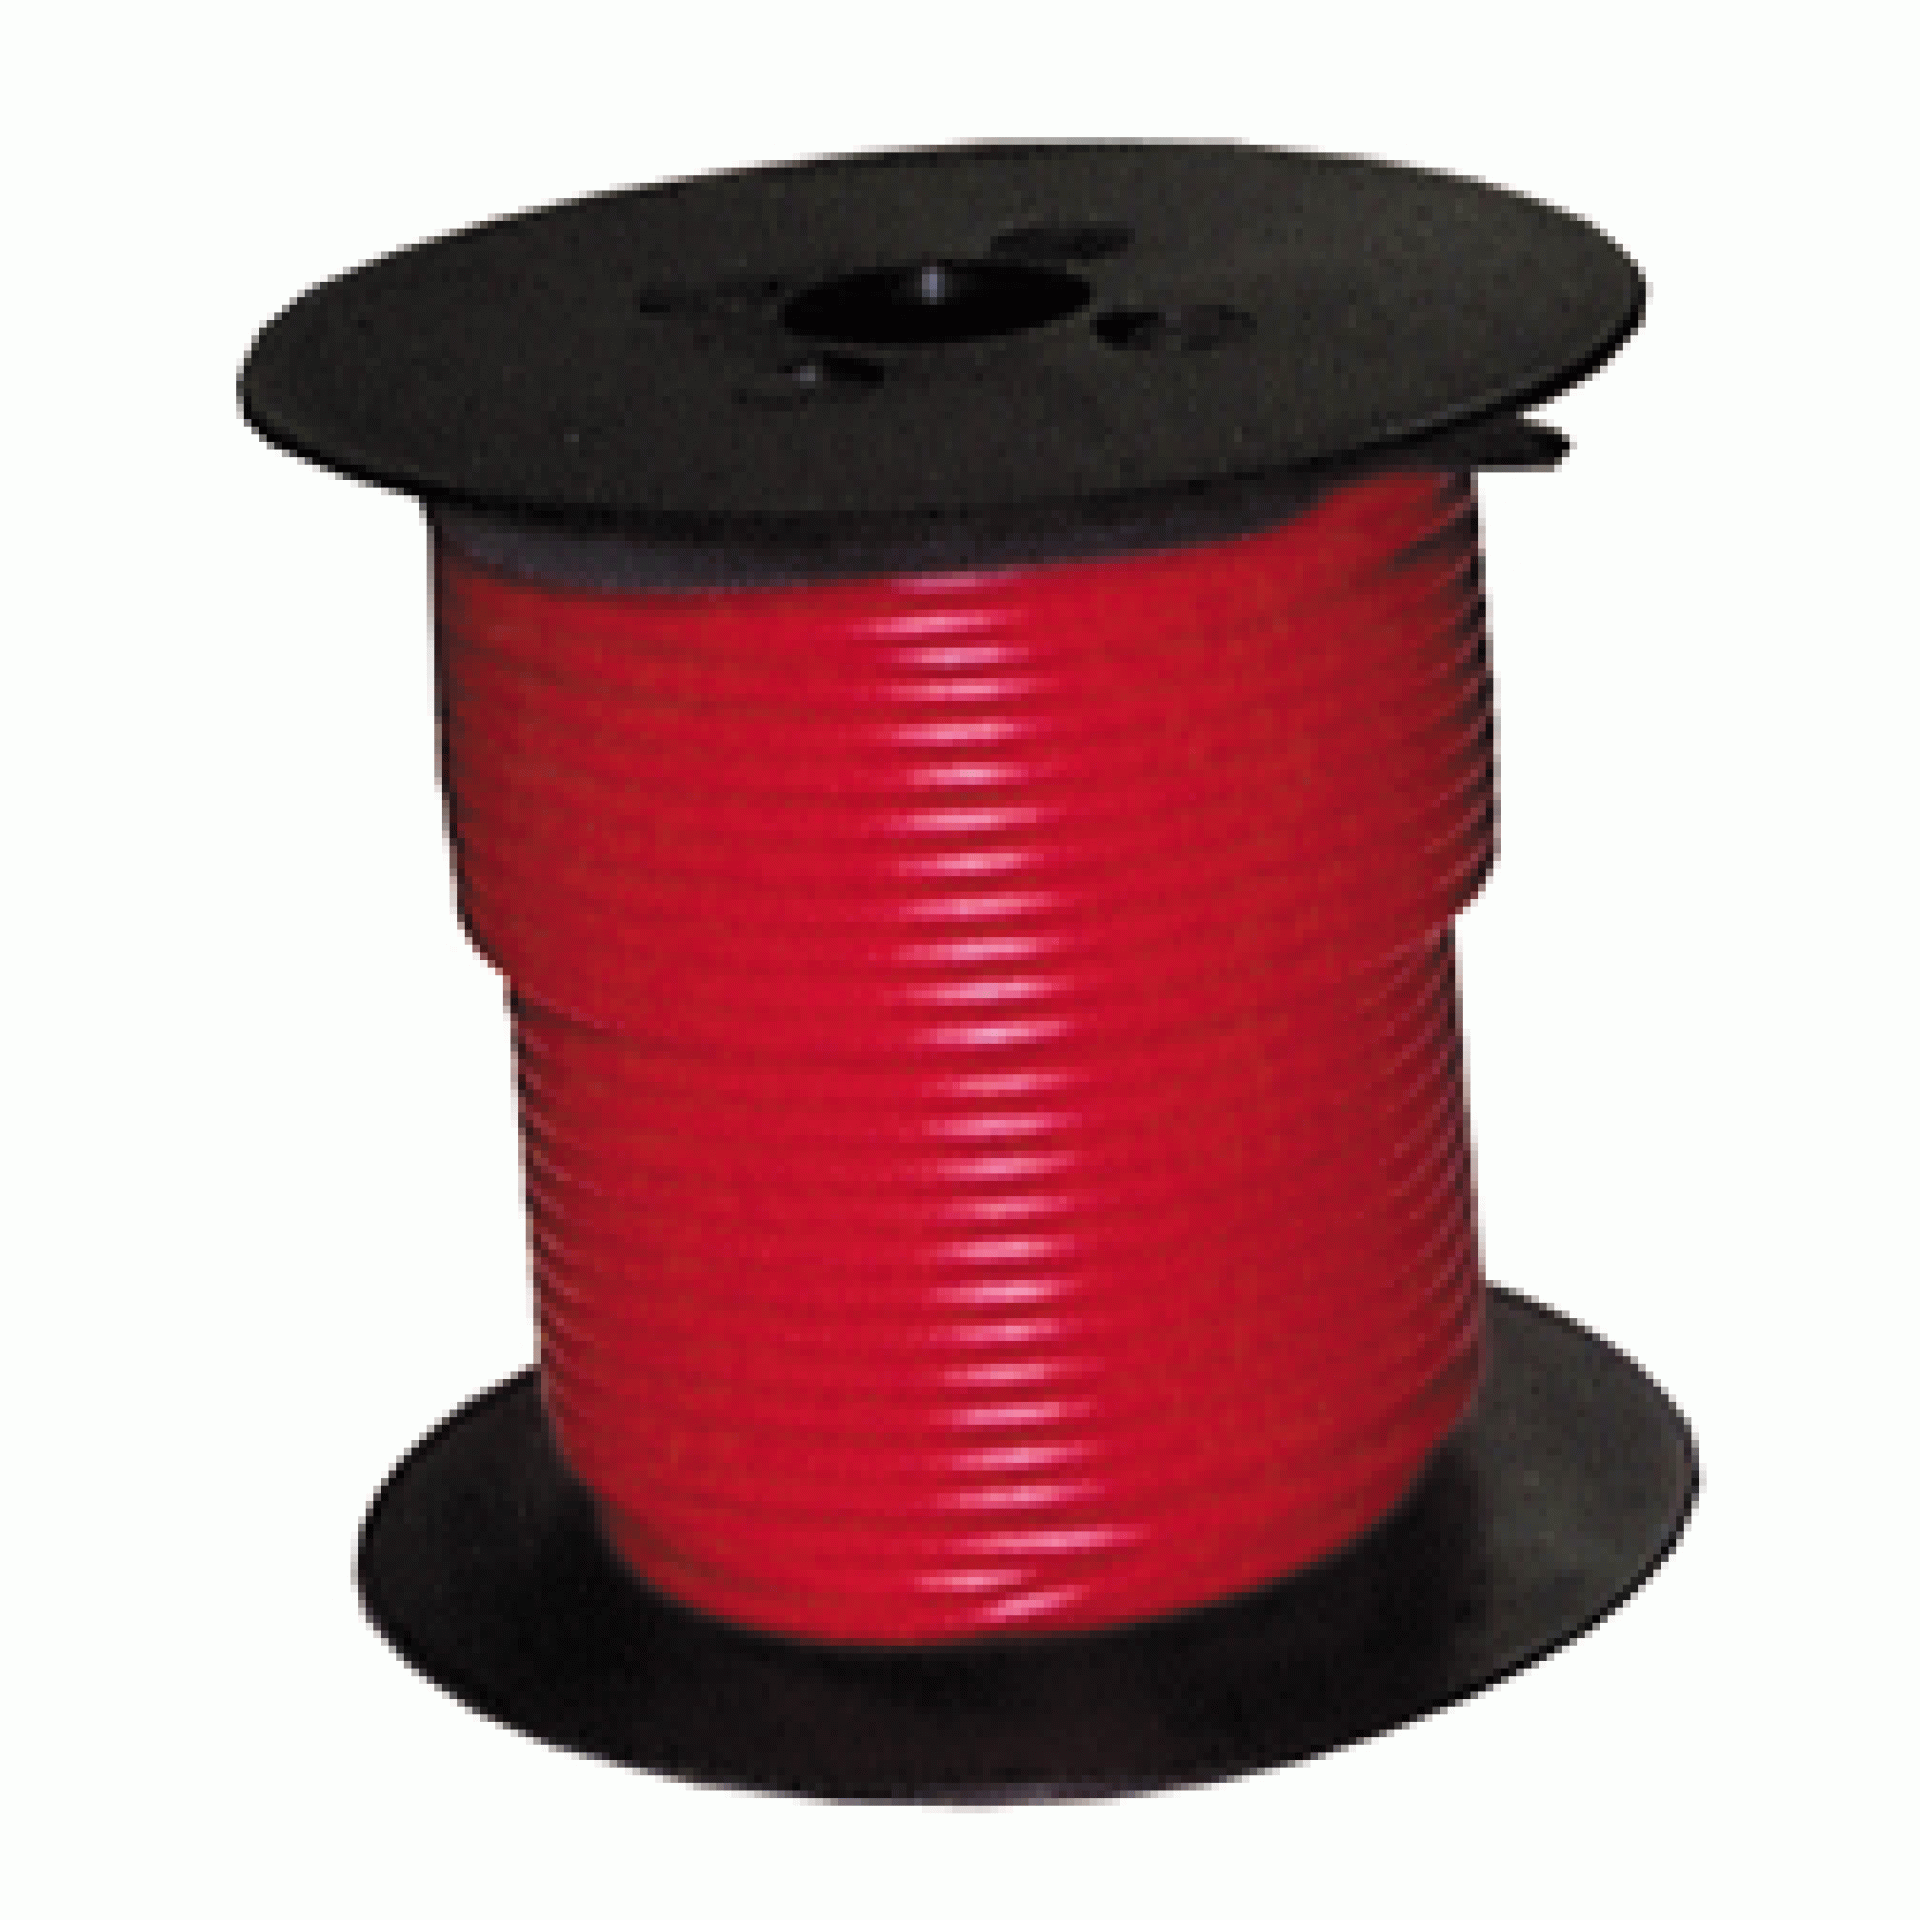 DEKA | 02358 | PRIMARY COPPER WIRE - RED - 16 GAUGE 100' SPOOLS